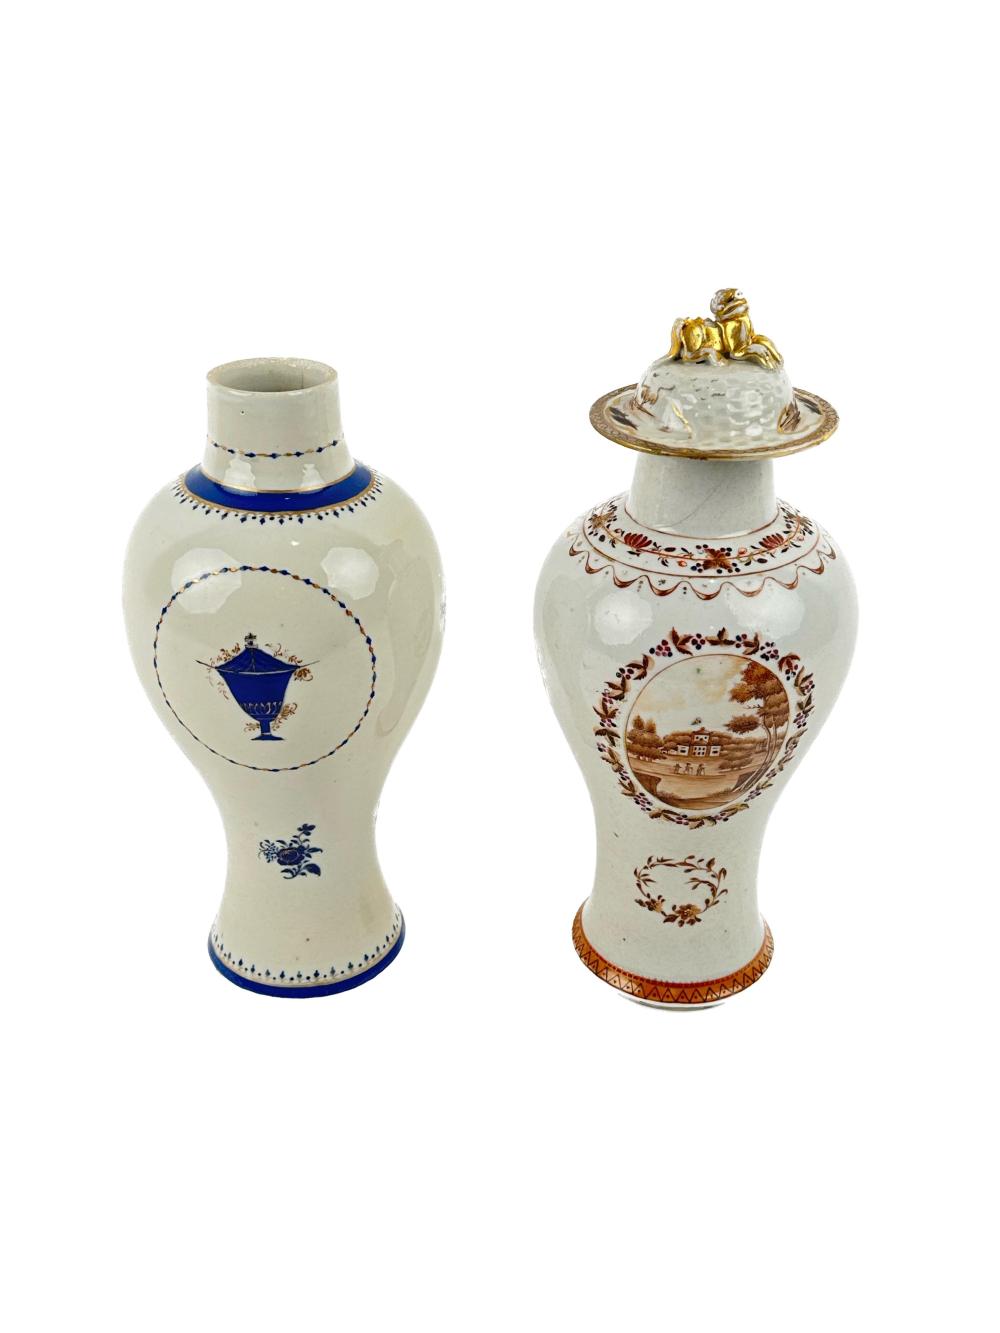 TWO CHINESE EXPORT PORCELAIN GARNITURE